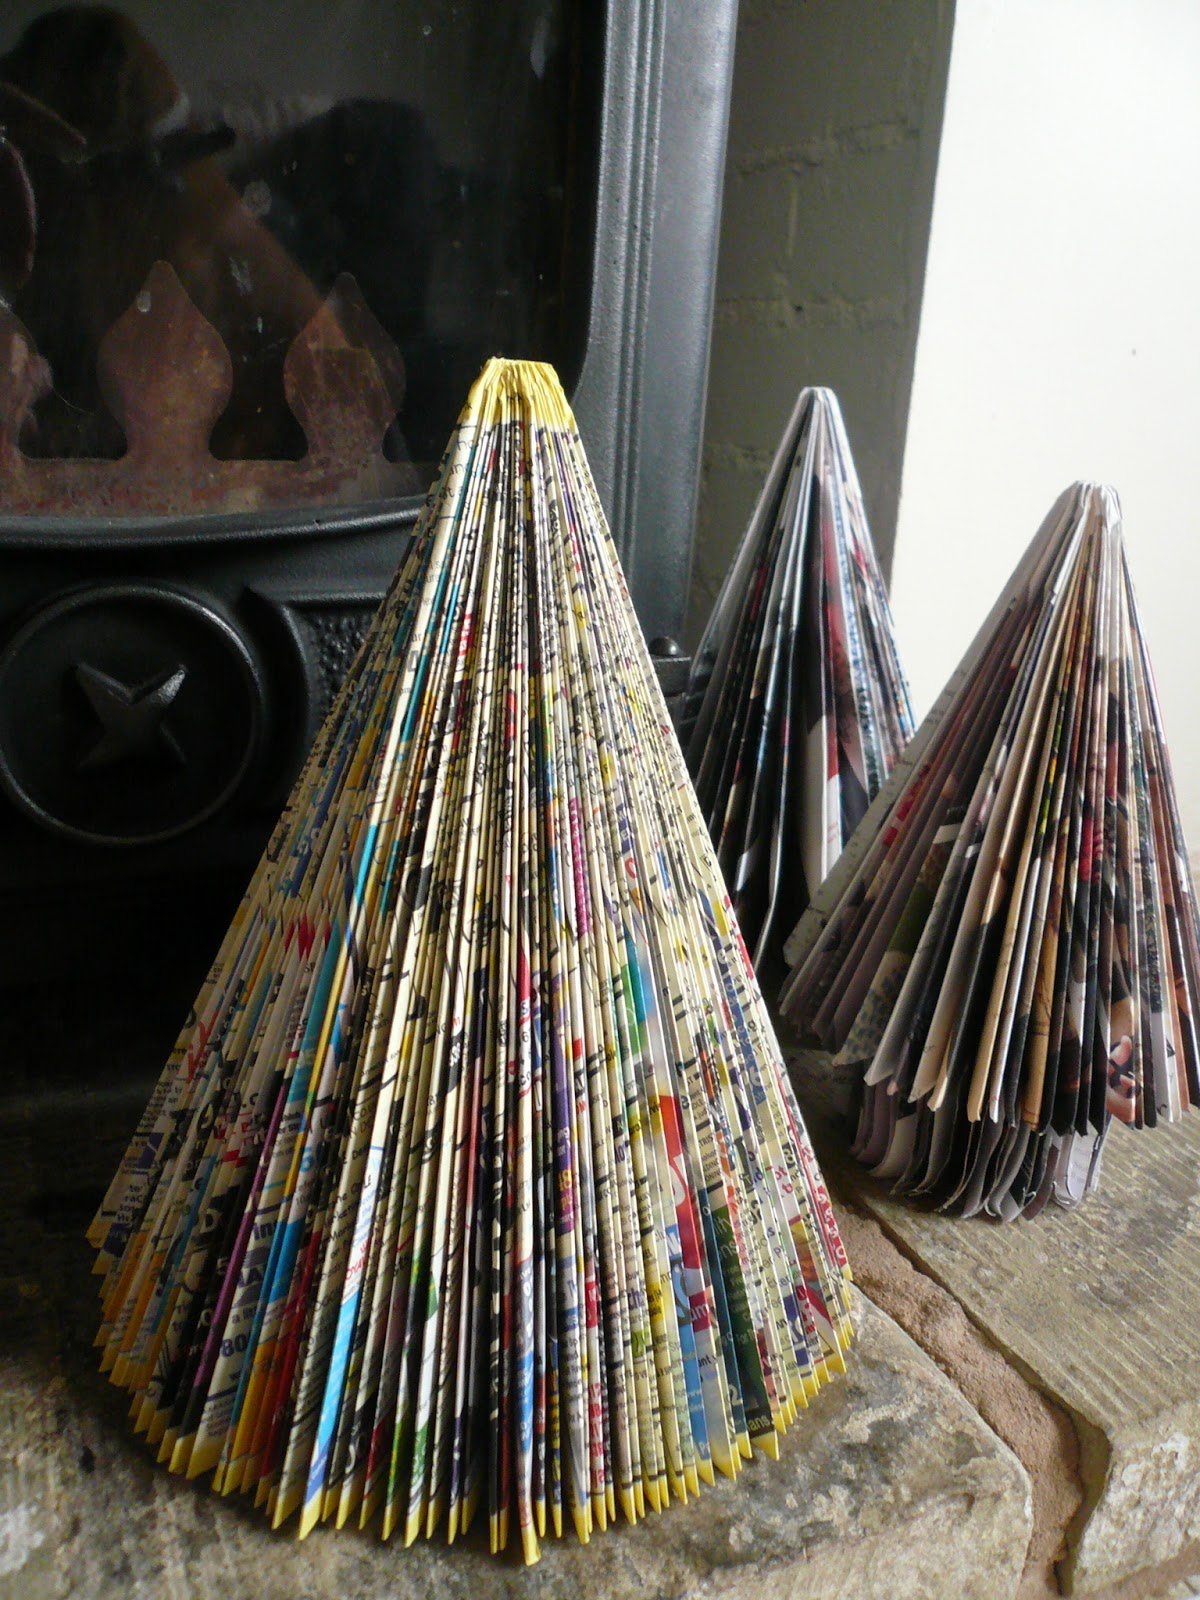 17 DIY Instructions and Ideas to Make a Christmas Tree with Books | Guide Patterns